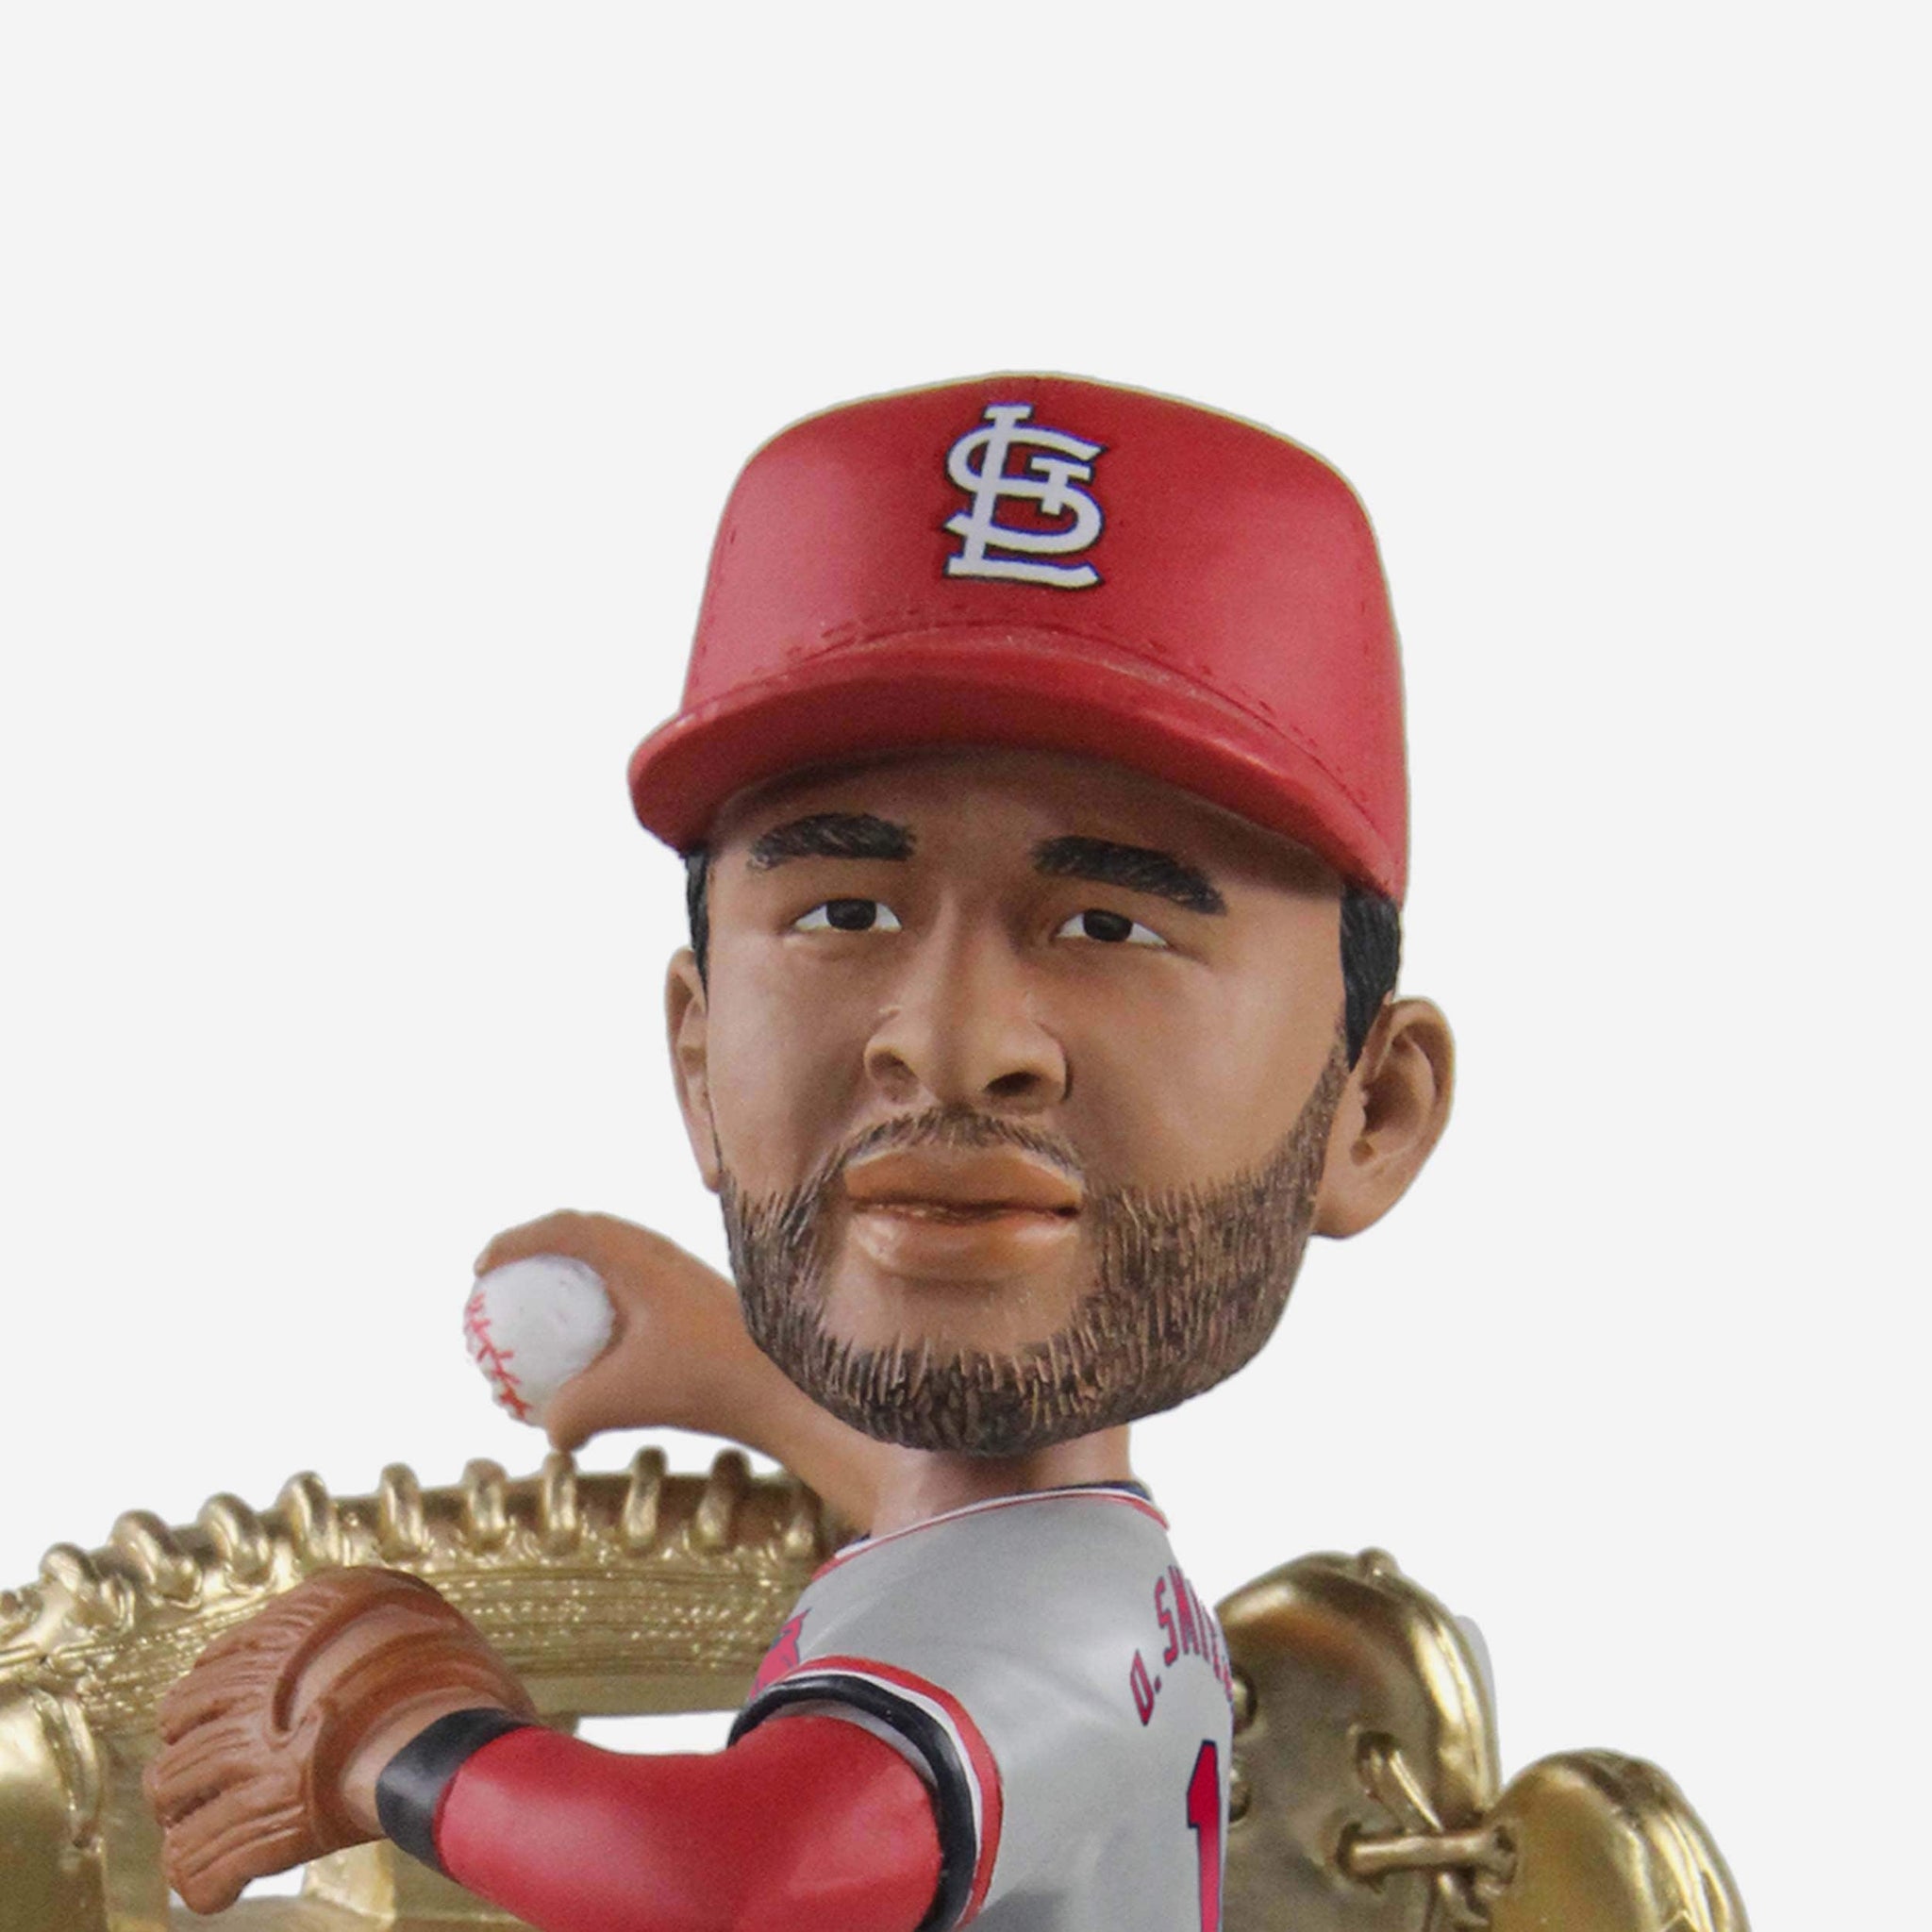 Throwback Ozzie Smith #1  Cardinals win, Gold gloves, National league